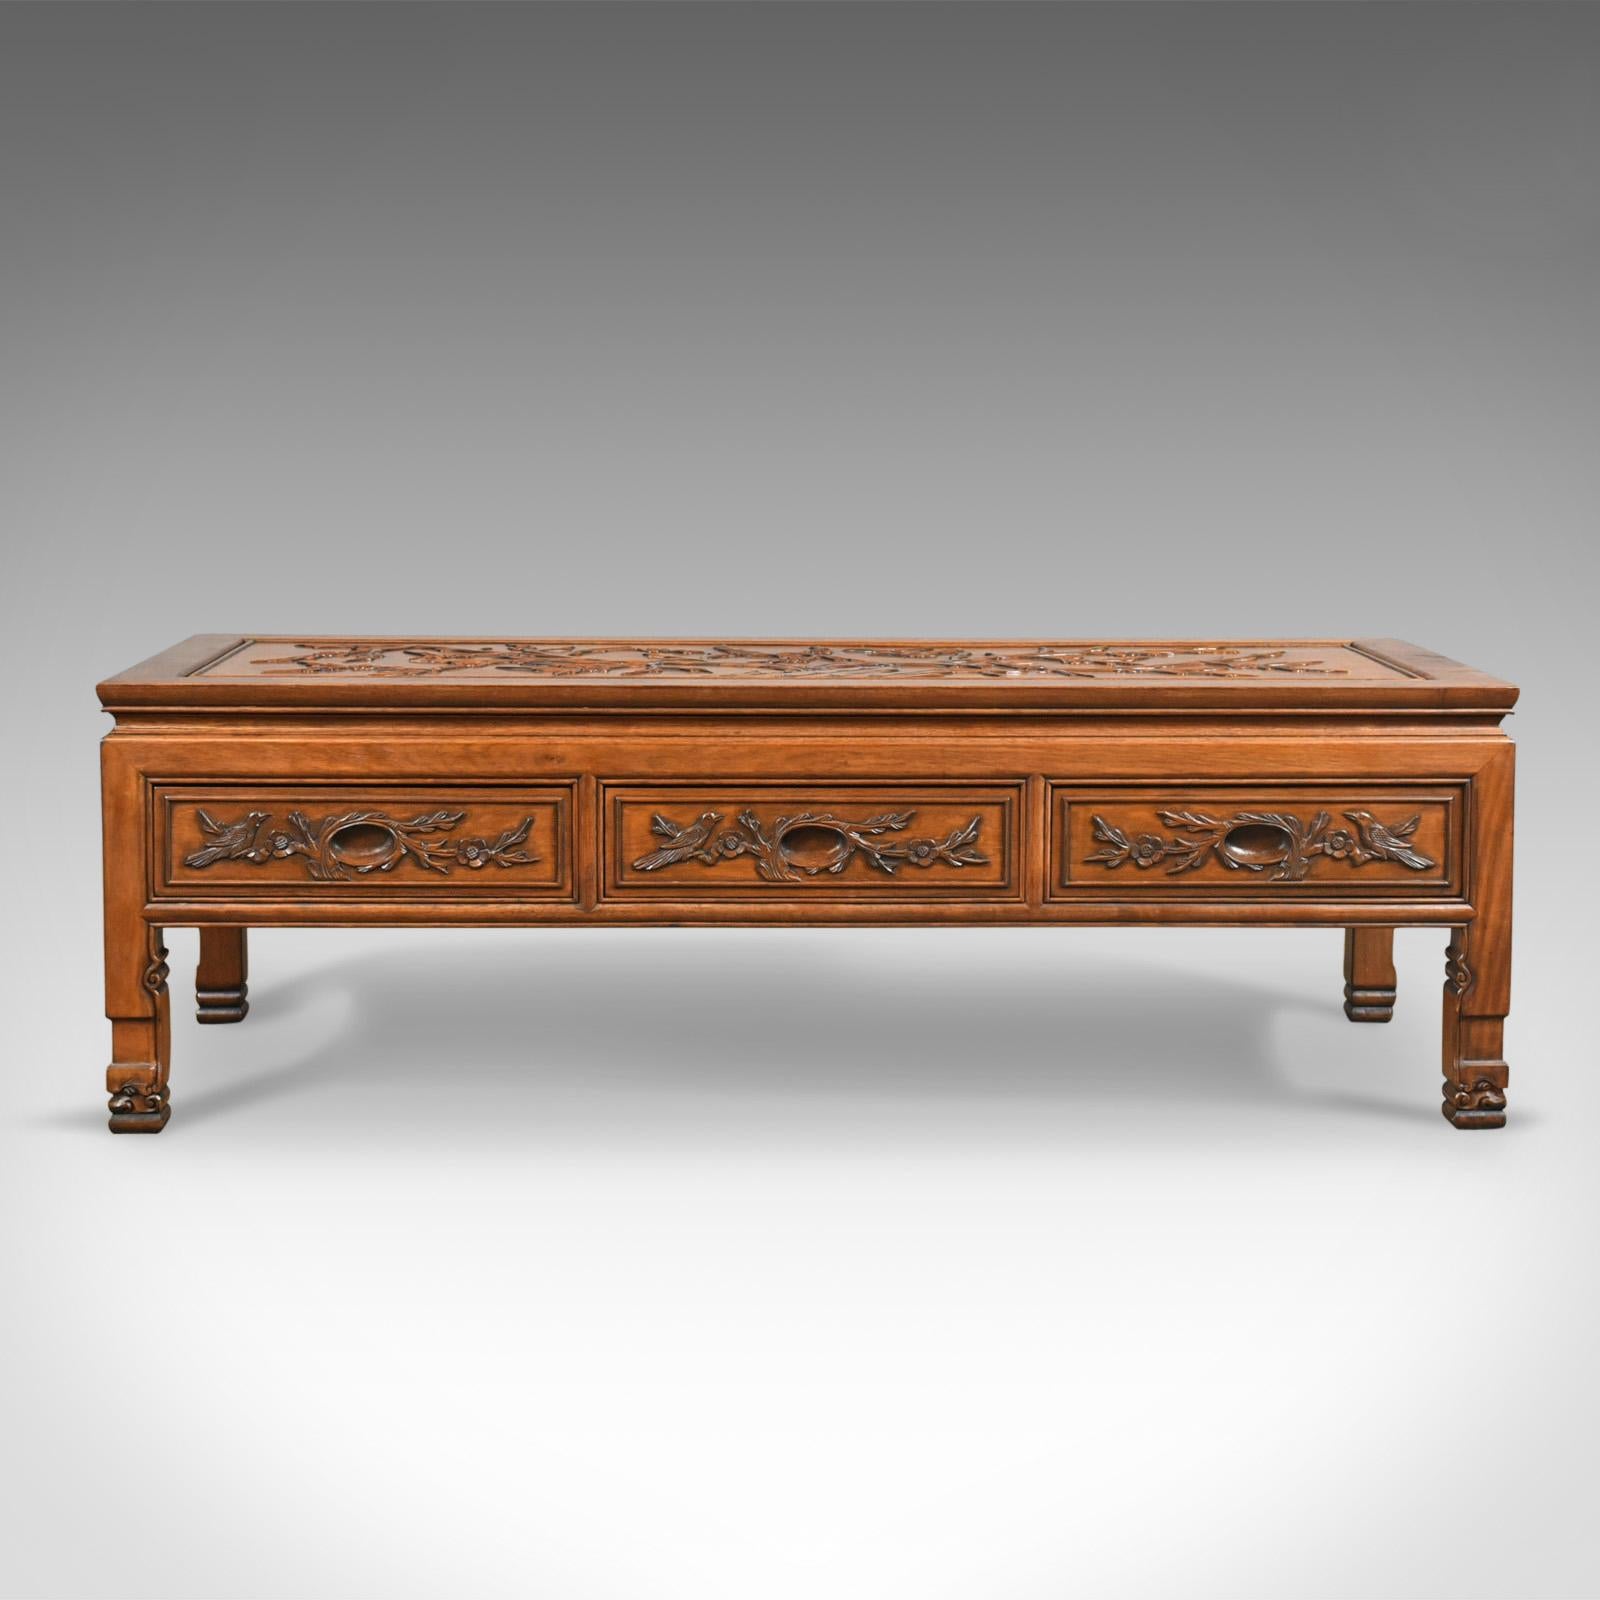 This is a vintage Chinese coffee table, a low, three drawer, and carved oriental cabinet dating to the late Art Deco period, circa 1940.

A most pleasing low table presented in good antique condition
Beautifully relief carved to the tabletop and